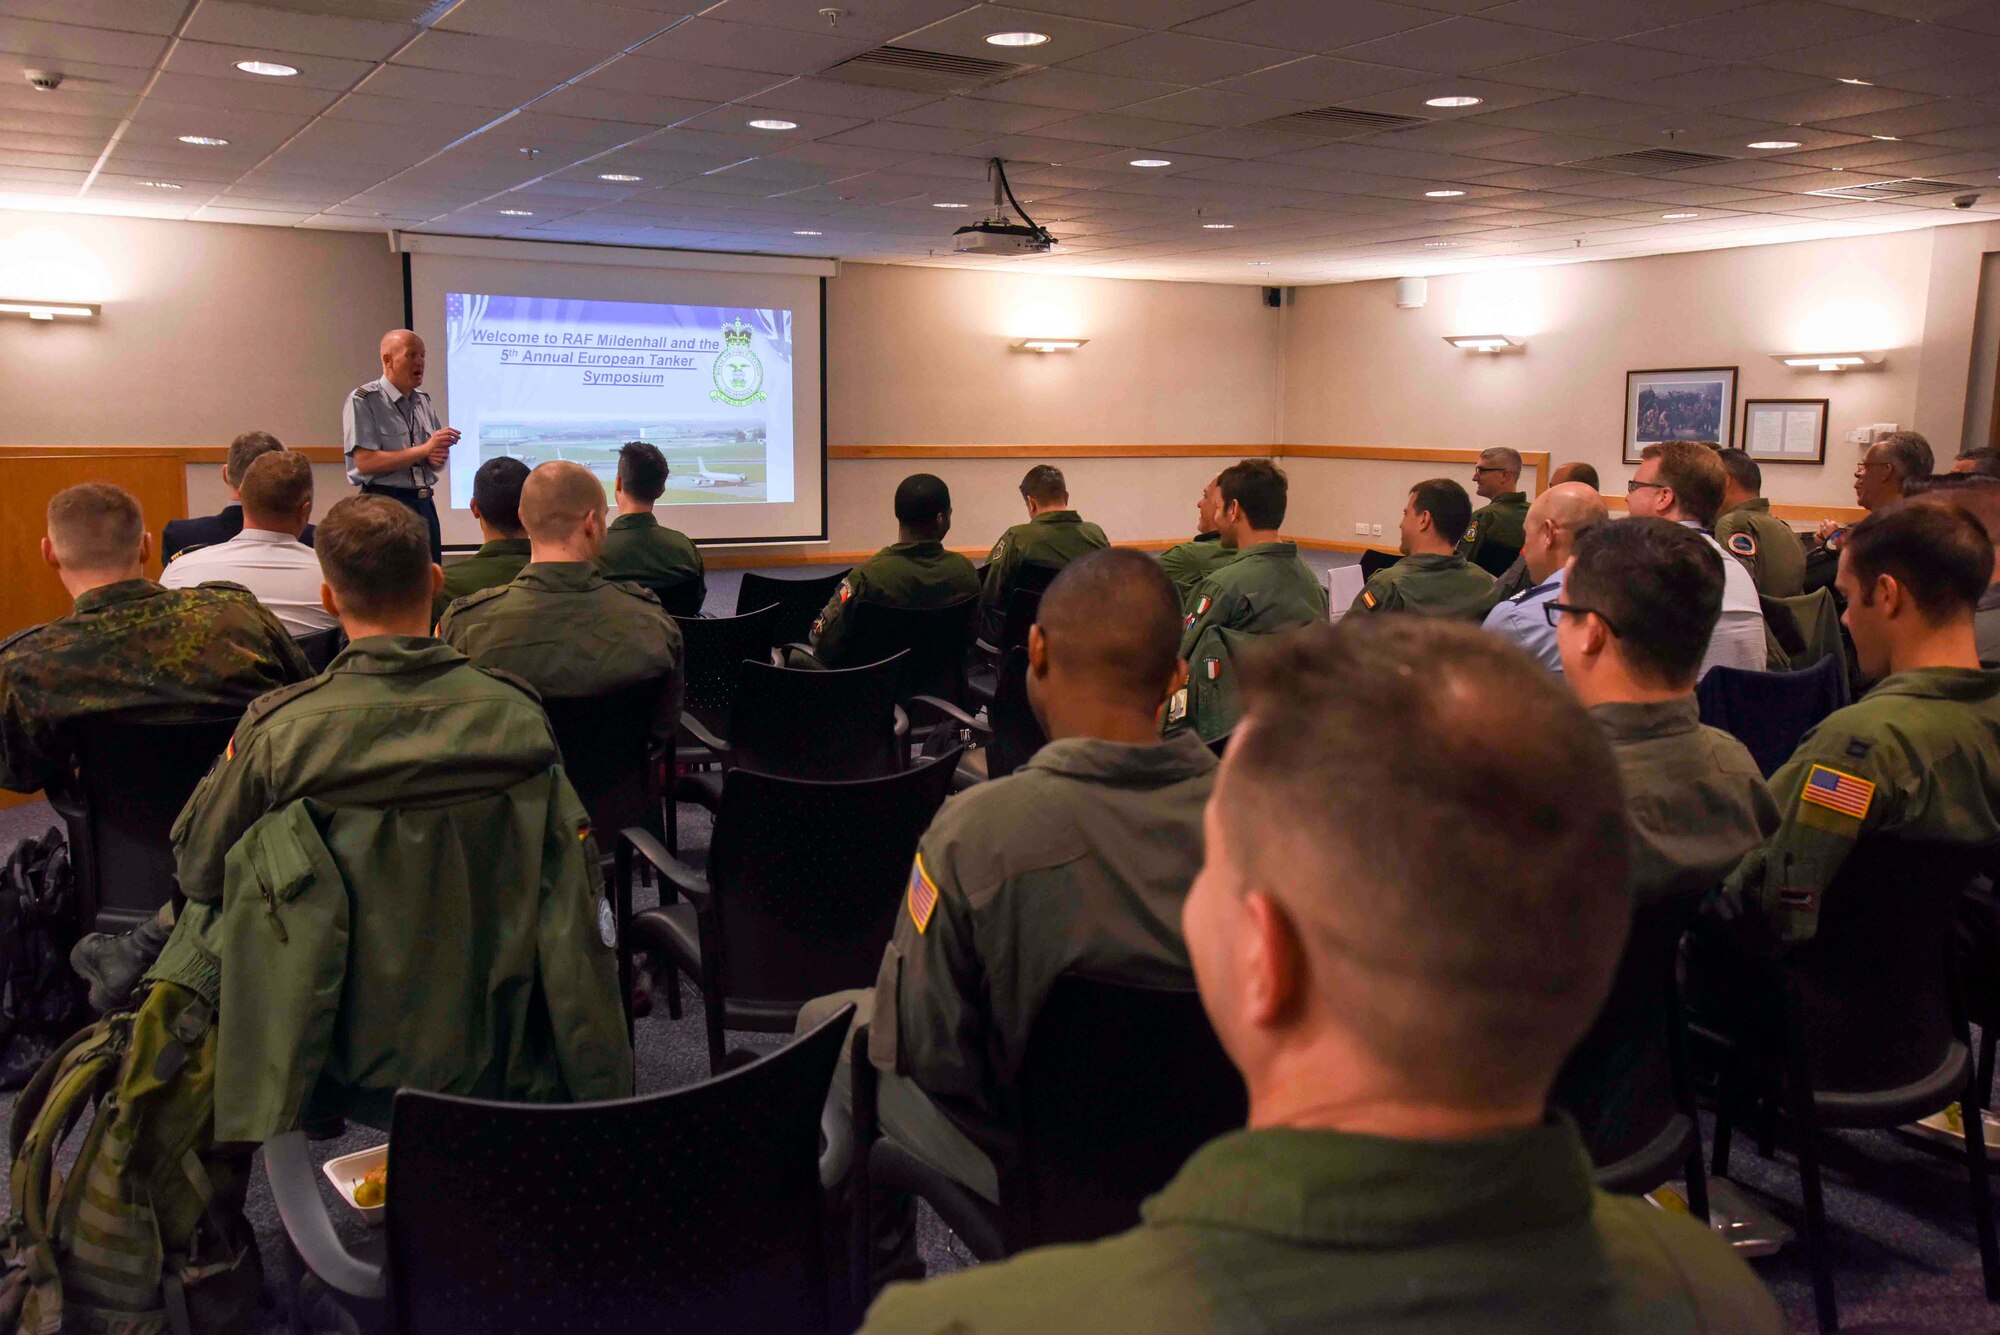 Sqn. Ldr. Richard Fryer, RAF Mildenhall station commander, welcomes aircrew on the first day of the European Tanker Symposium at RAF Mildenhall, England, May 14, 2018.  The 100th Air Refueling Wing hosted the 5th annual European Tanker Symposium, where 13 countries came together and trained to establish mixed-flight formation air refueling standardized procedures. (U.S. Air Force photo by Senior Airman Christine Groening)